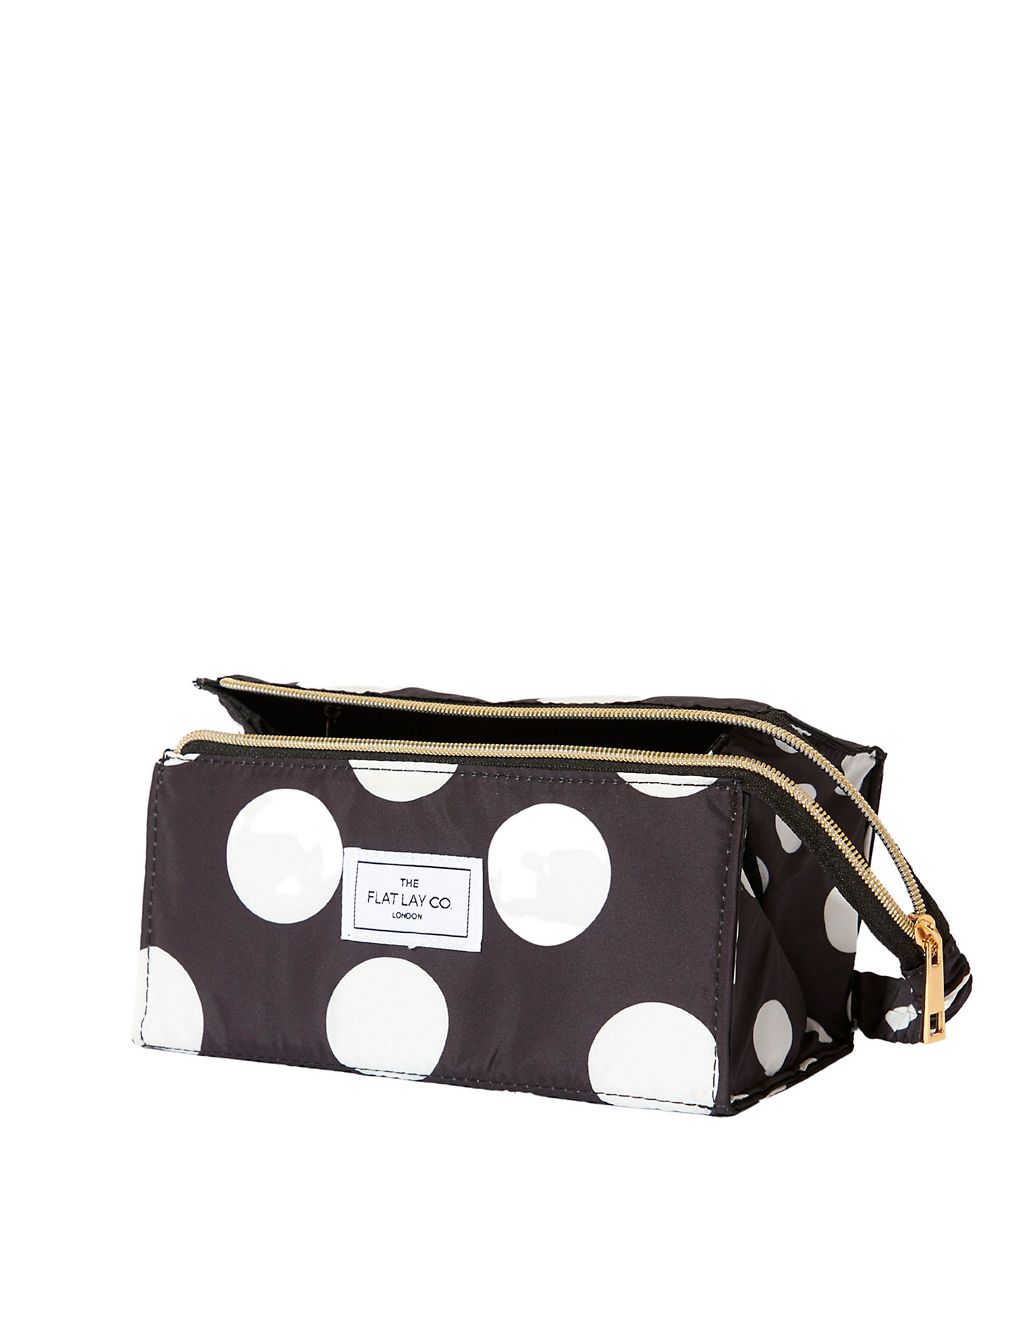 The Flat Lay Co. Makeup Box Bag in Double Spots 2 of 5